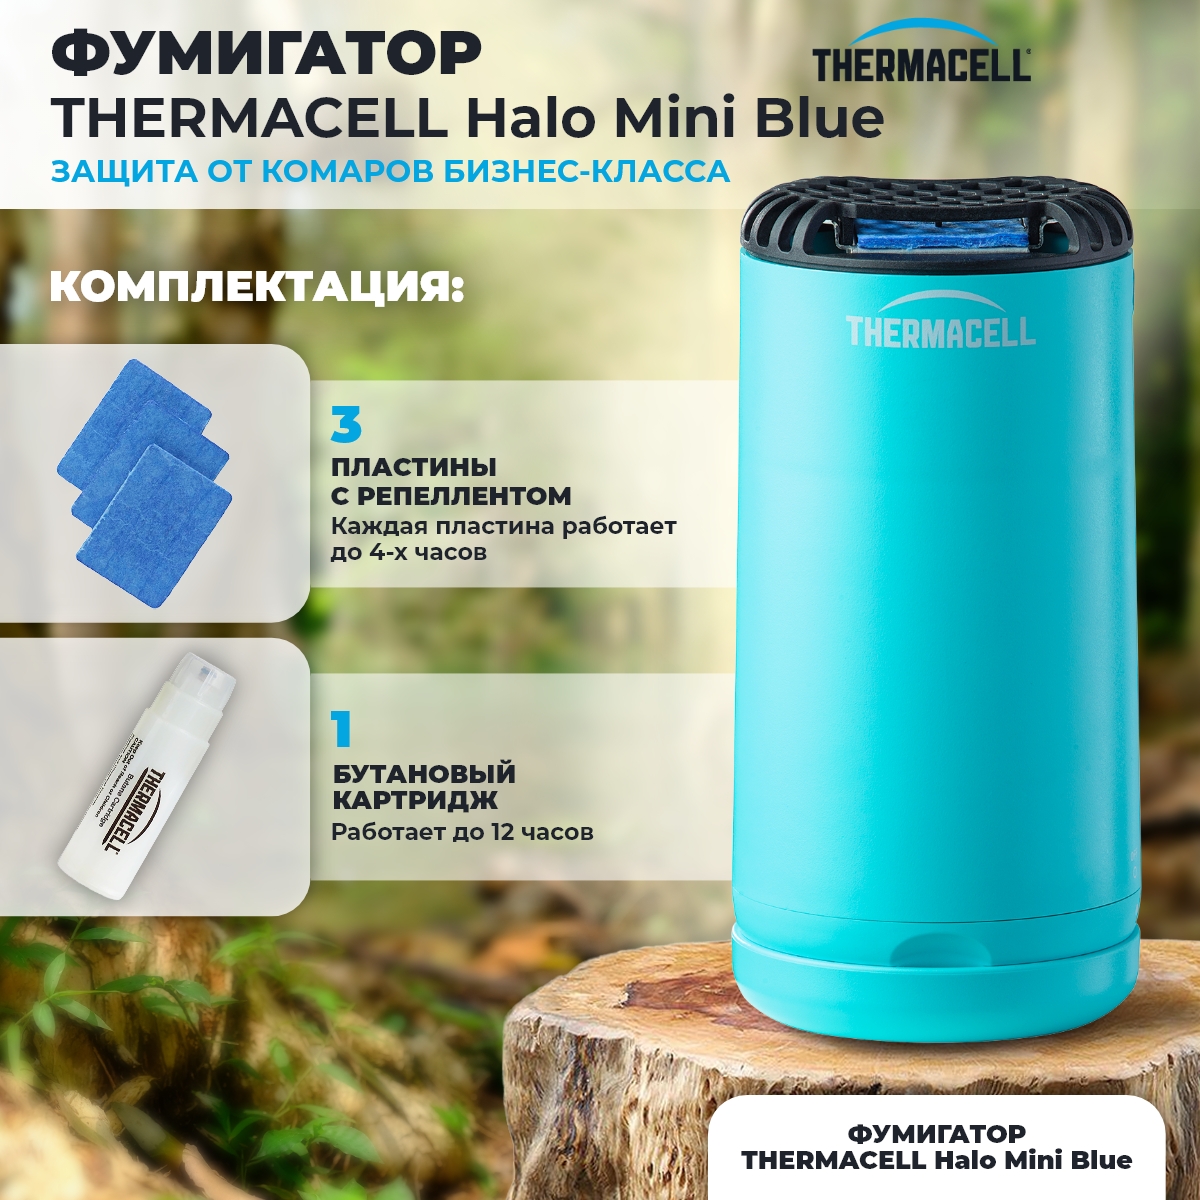 Фумигатор ThermaCell Halo Mini Repeller Blue